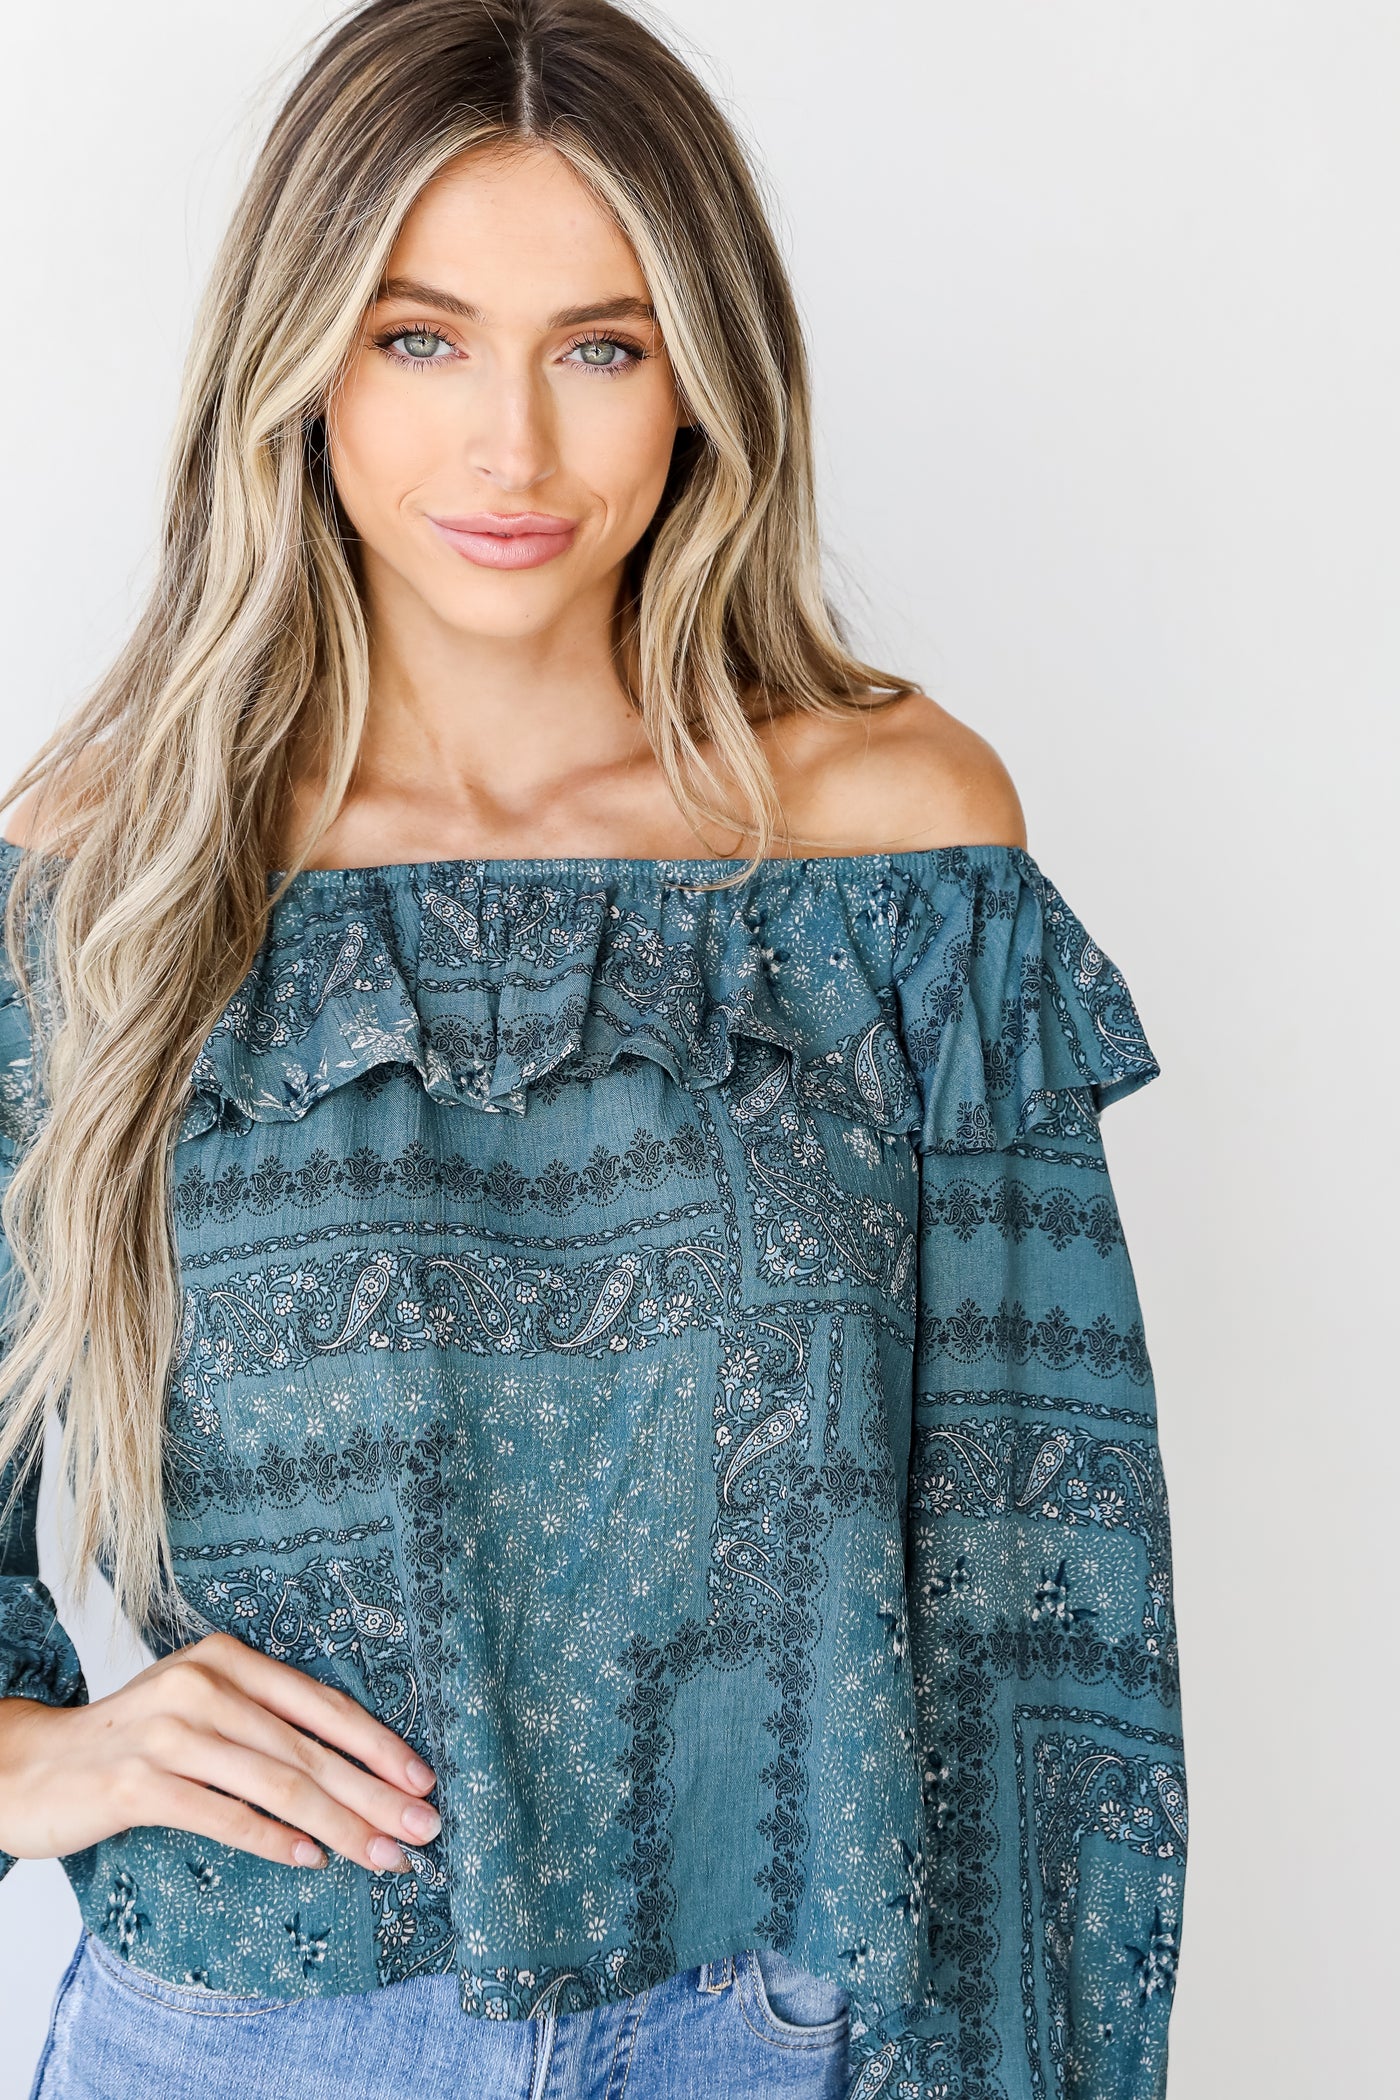 Floral Ruffle Blouse in teal on model